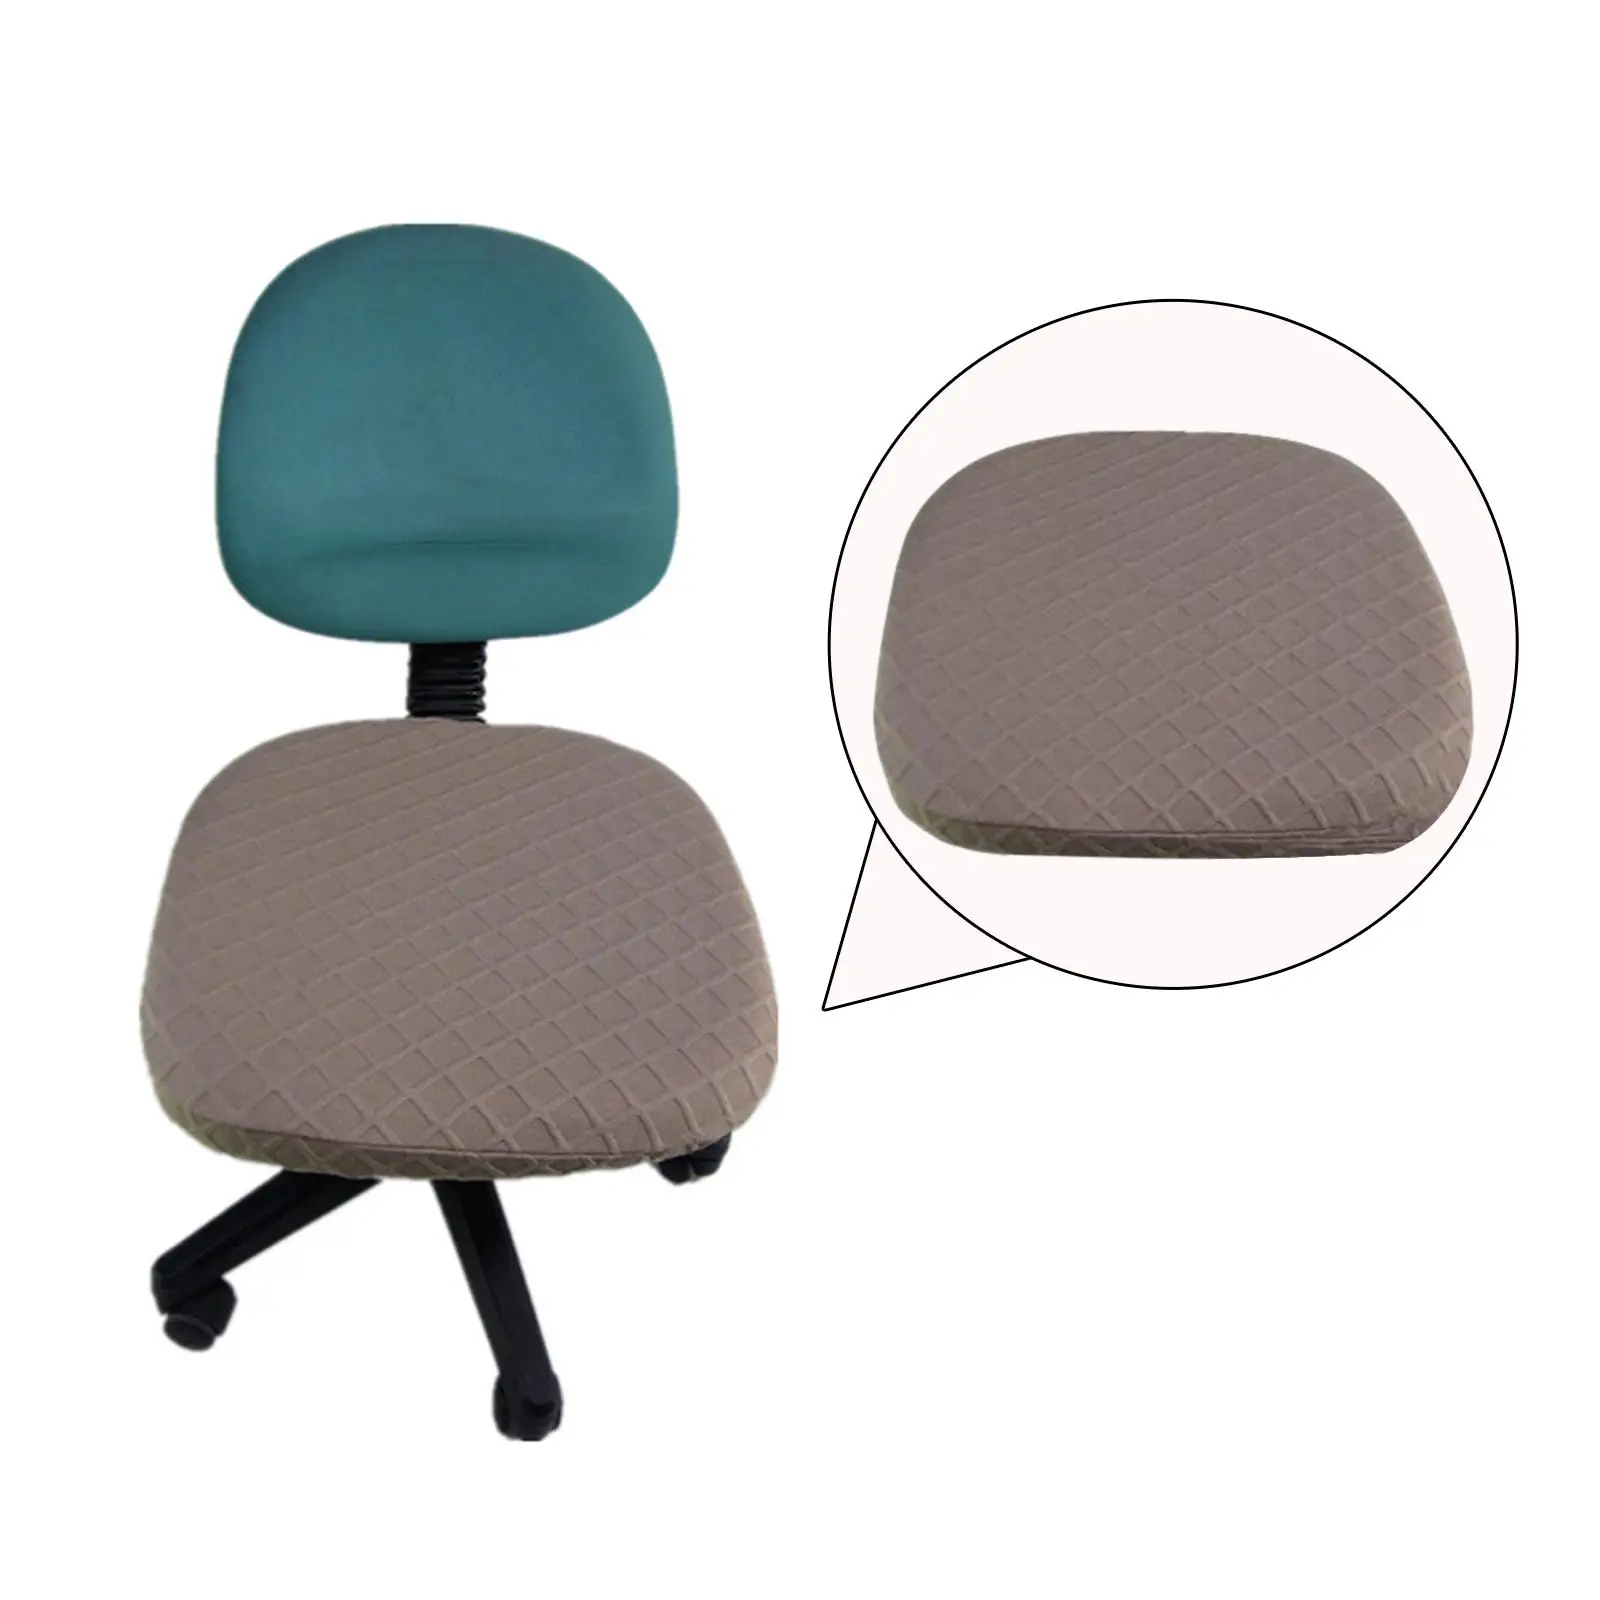 Stretchable Jacquard Computer Chair Seat Cover Anti Slip Reusable Easily Install